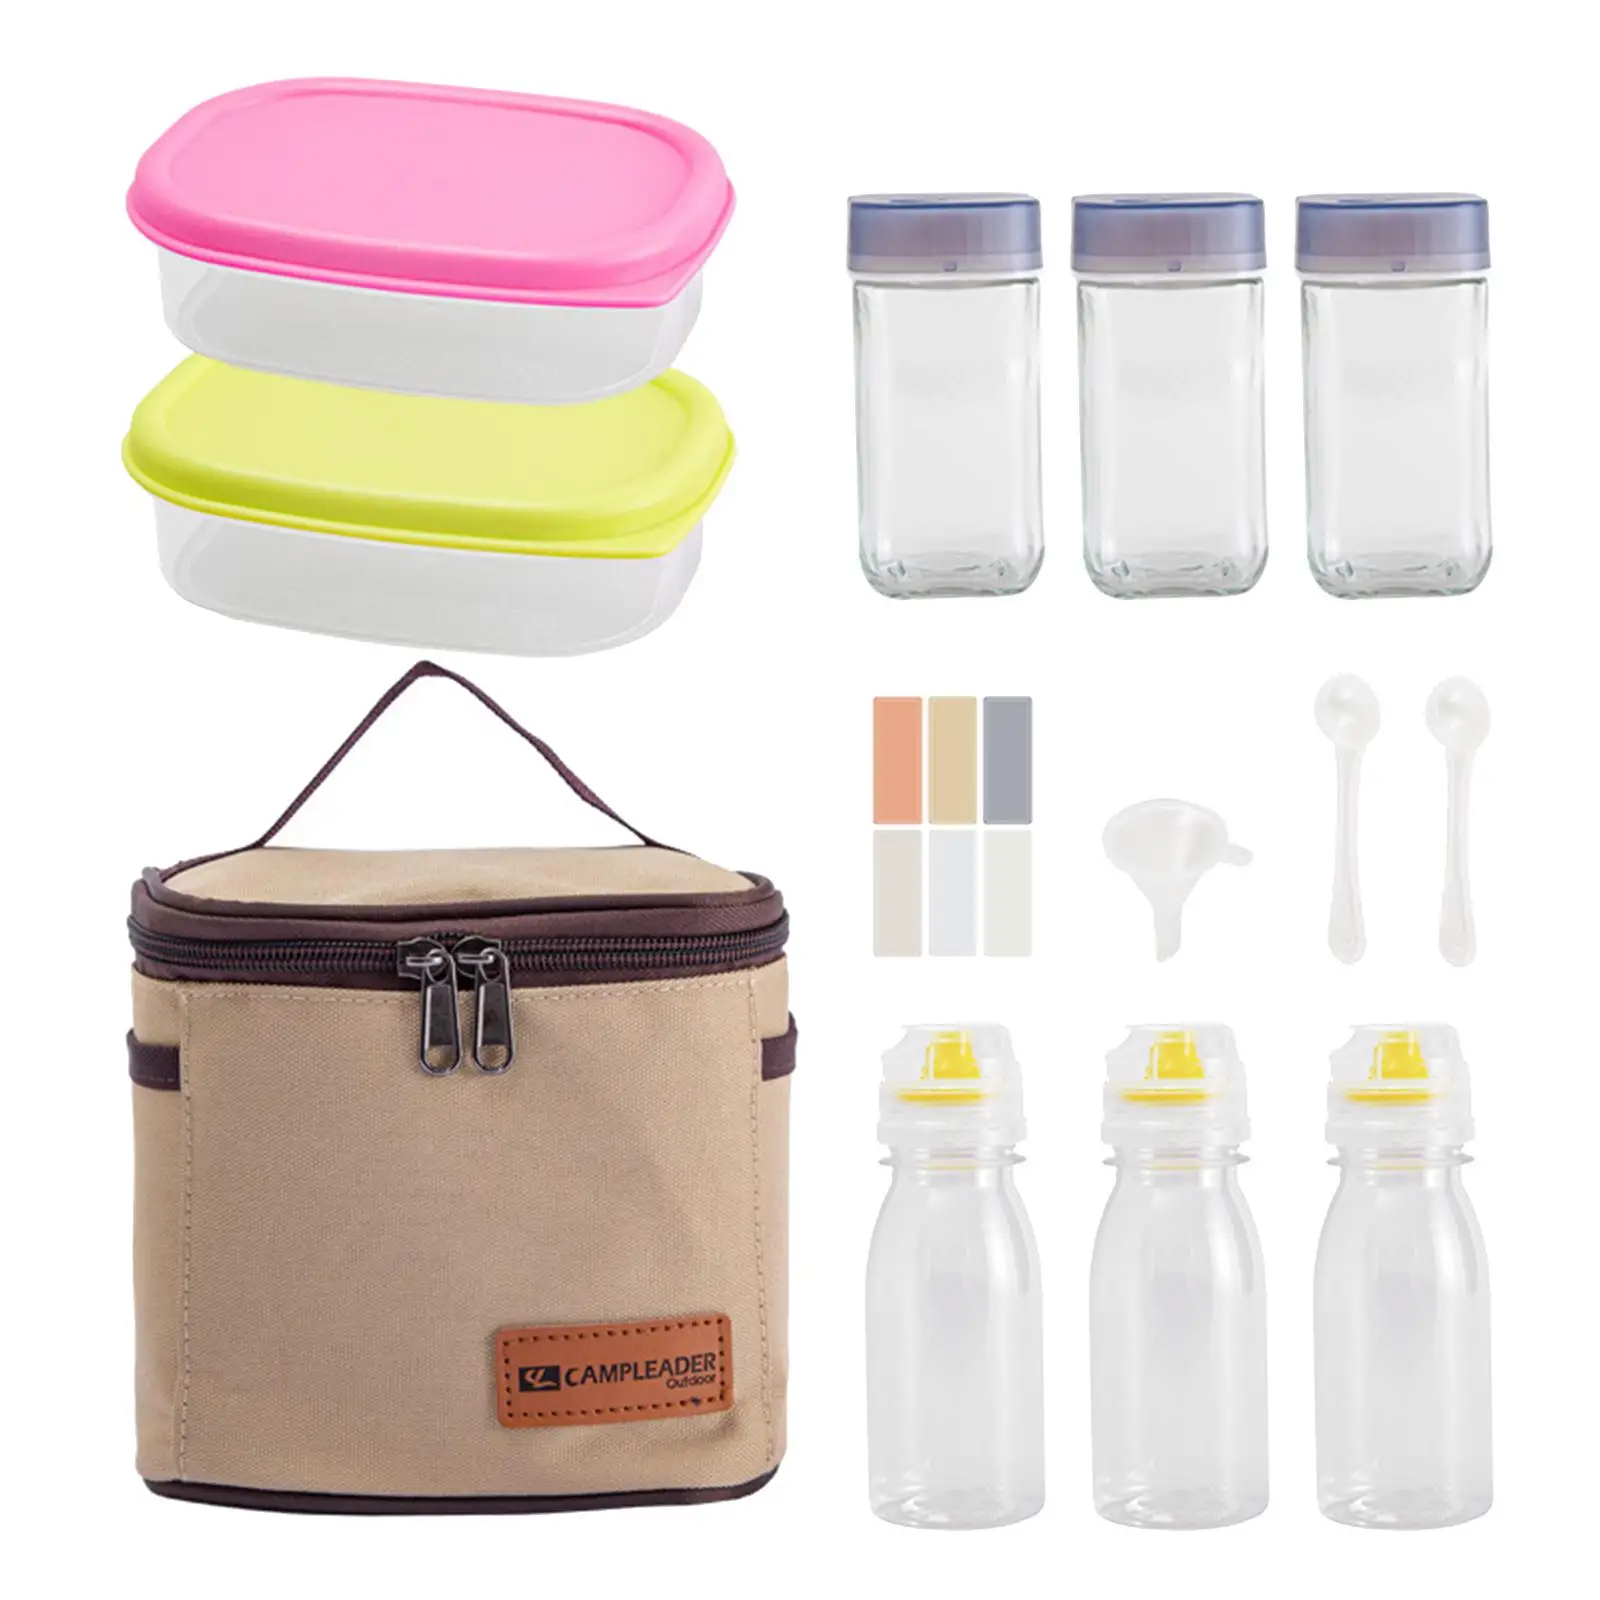 Portable Camping Spice Jars Sauce Condiment Containers Set with Carrying Bag for